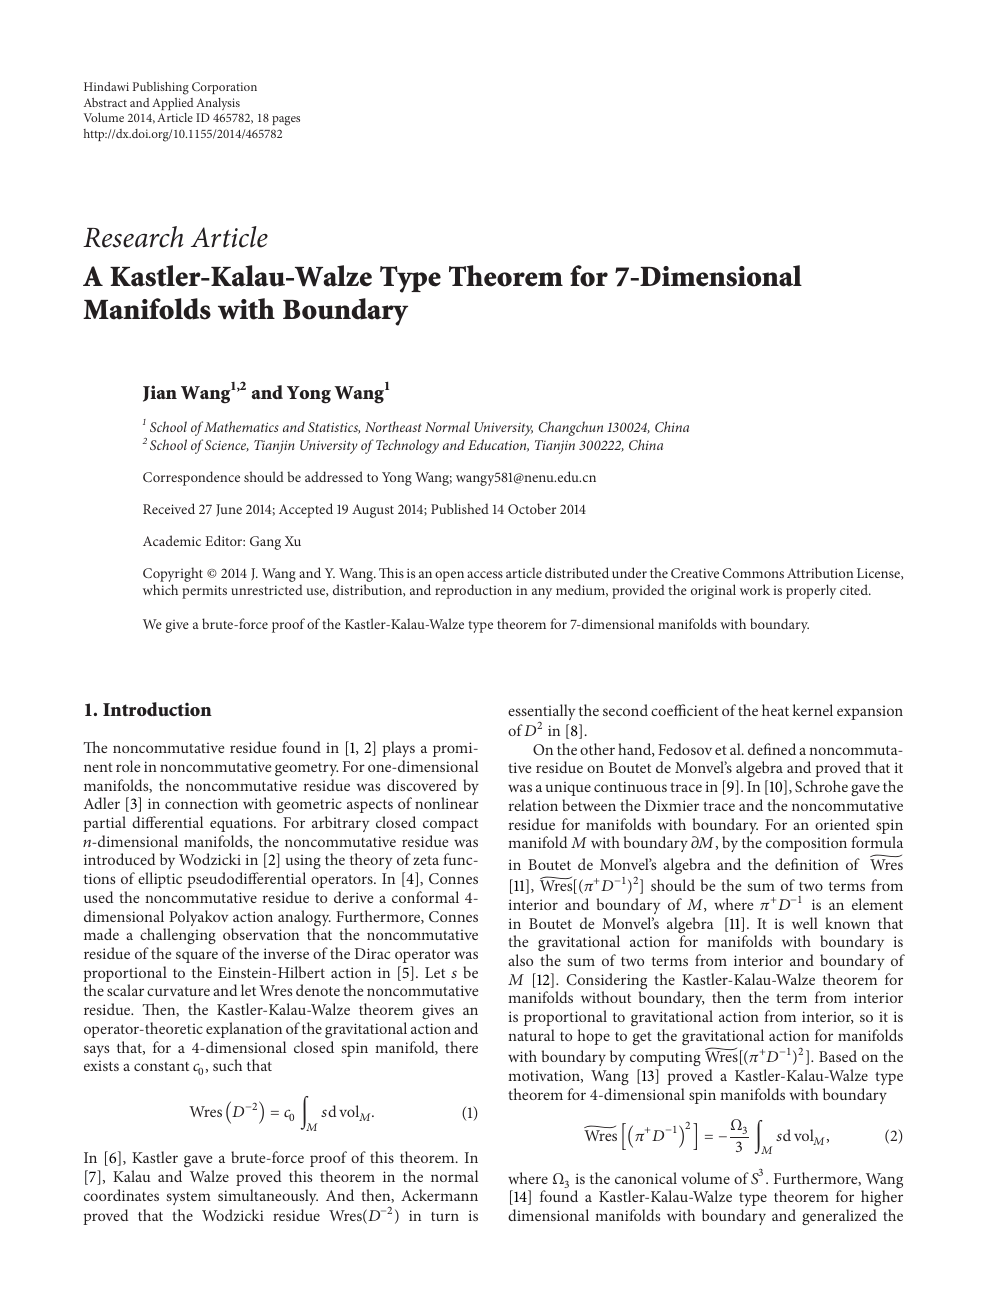 A Kastler Kalau Walze Type Theorem For 7 Dimensional Manifolds With Boundary Topic Of Research Paper In Mathematics Download Scholarly Article Pdf And Read For Free On Cyberleninka Open Science Hub